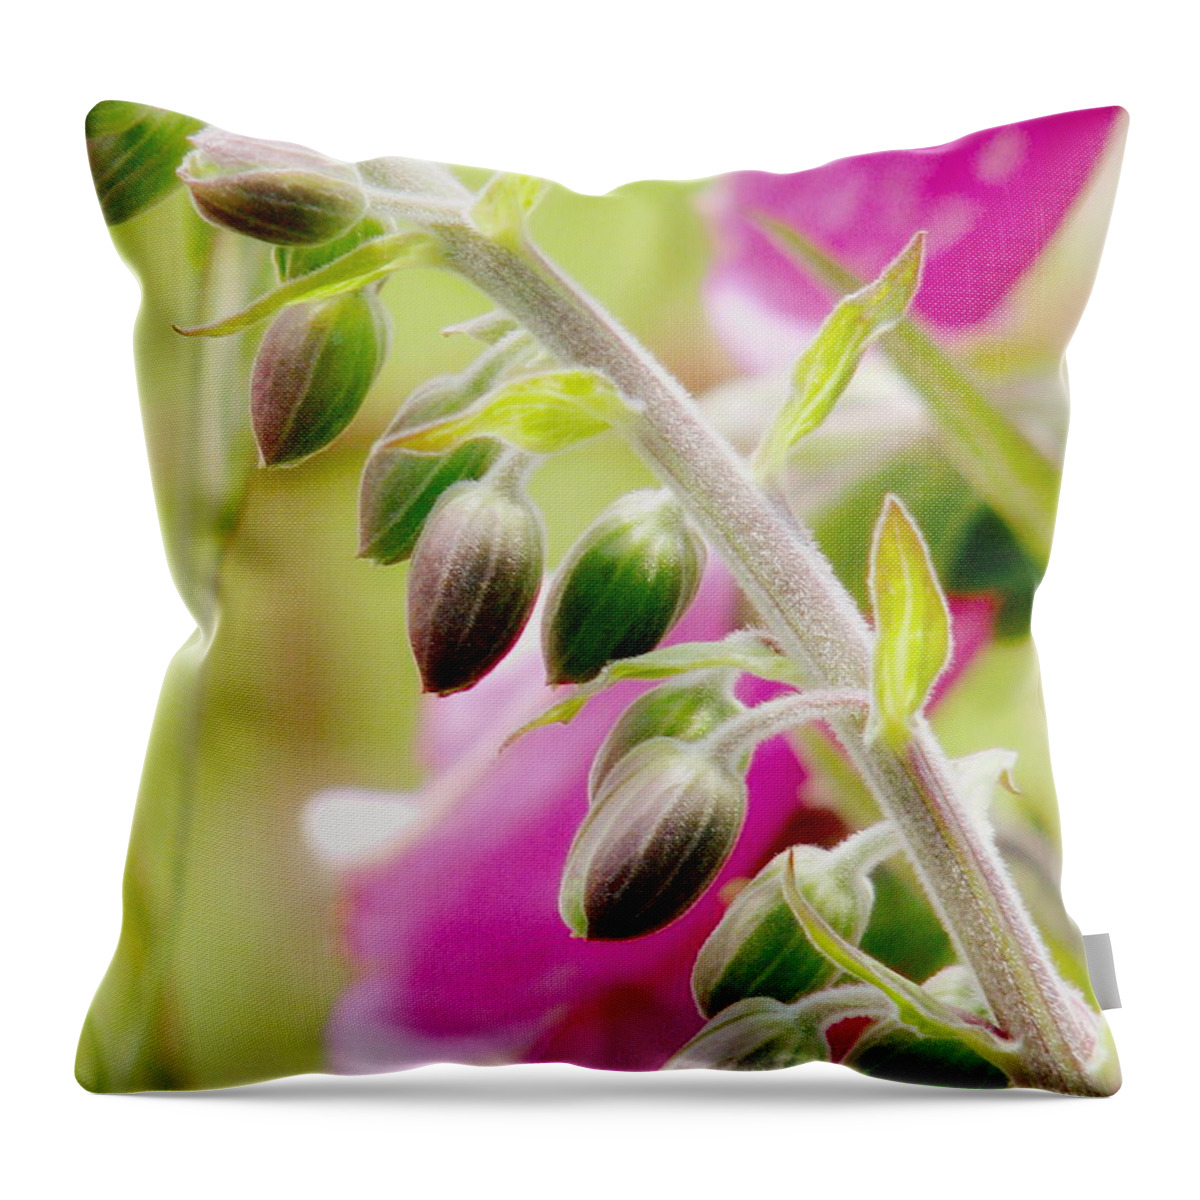 Foxglove Throw Pillow featuring the photograph Discussing When To Bloom by Rory Siegel